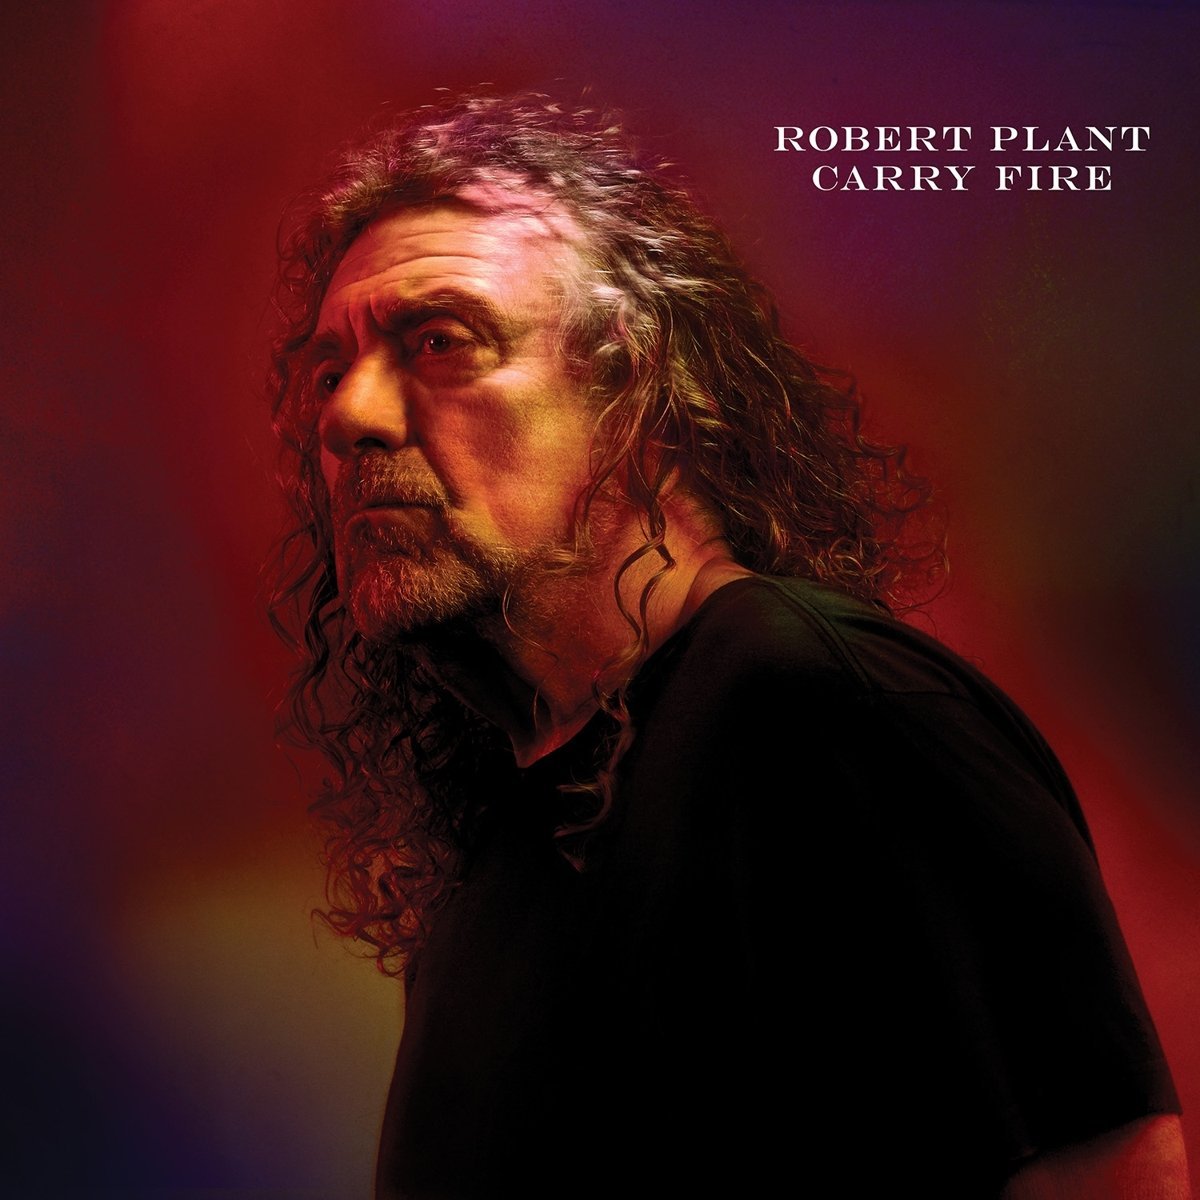 PHOTO: Robert Plant's new album "Carry Fire" was released, Oct. 13, 2017.